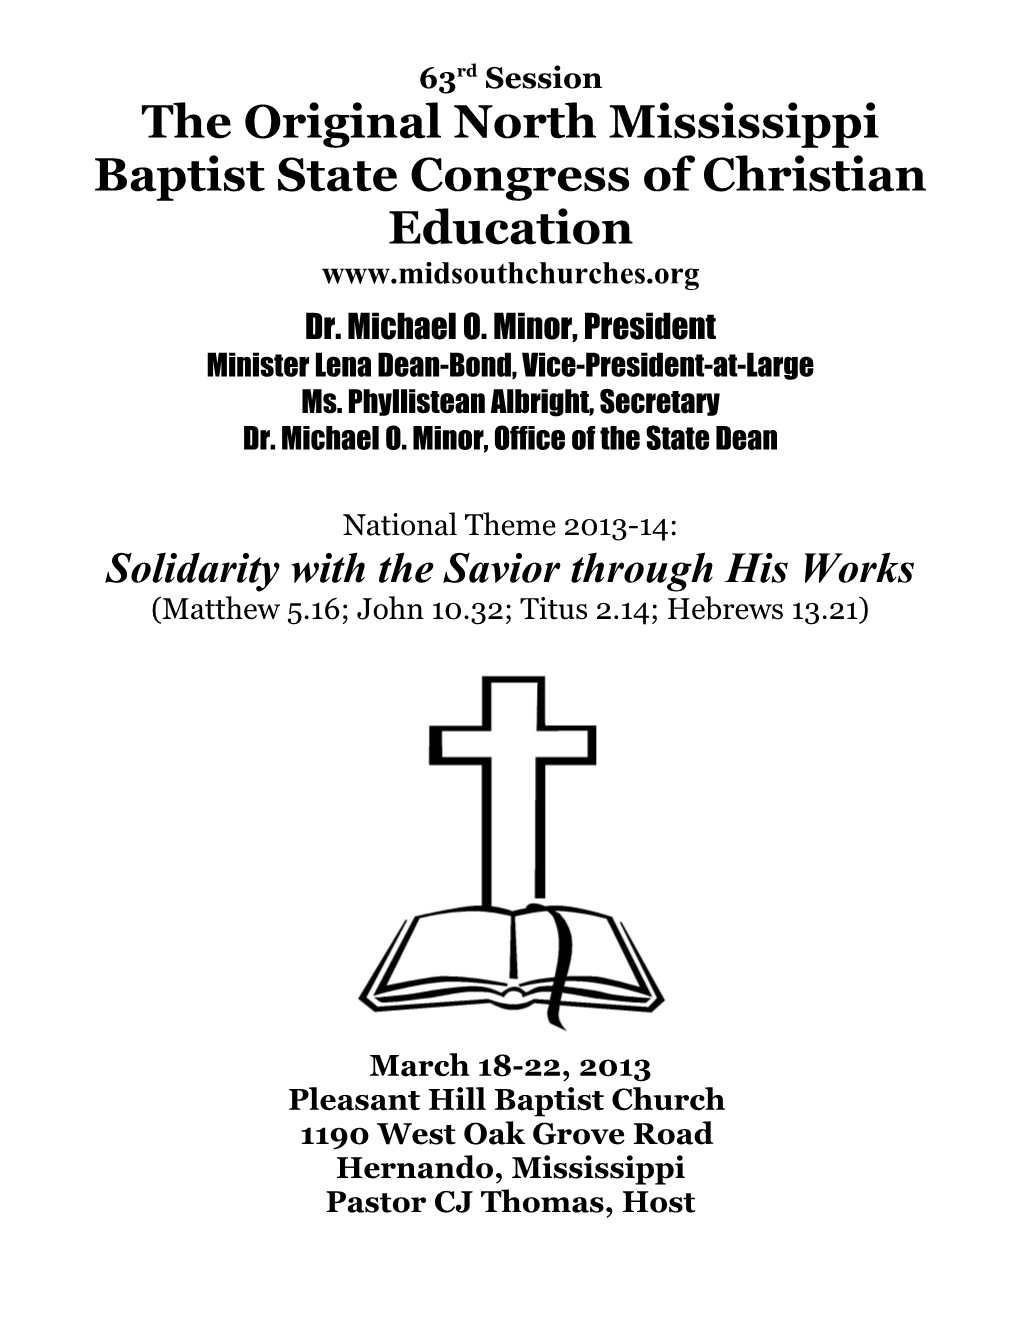 The Original North Mississippi Baptist State Congress of Christian Education